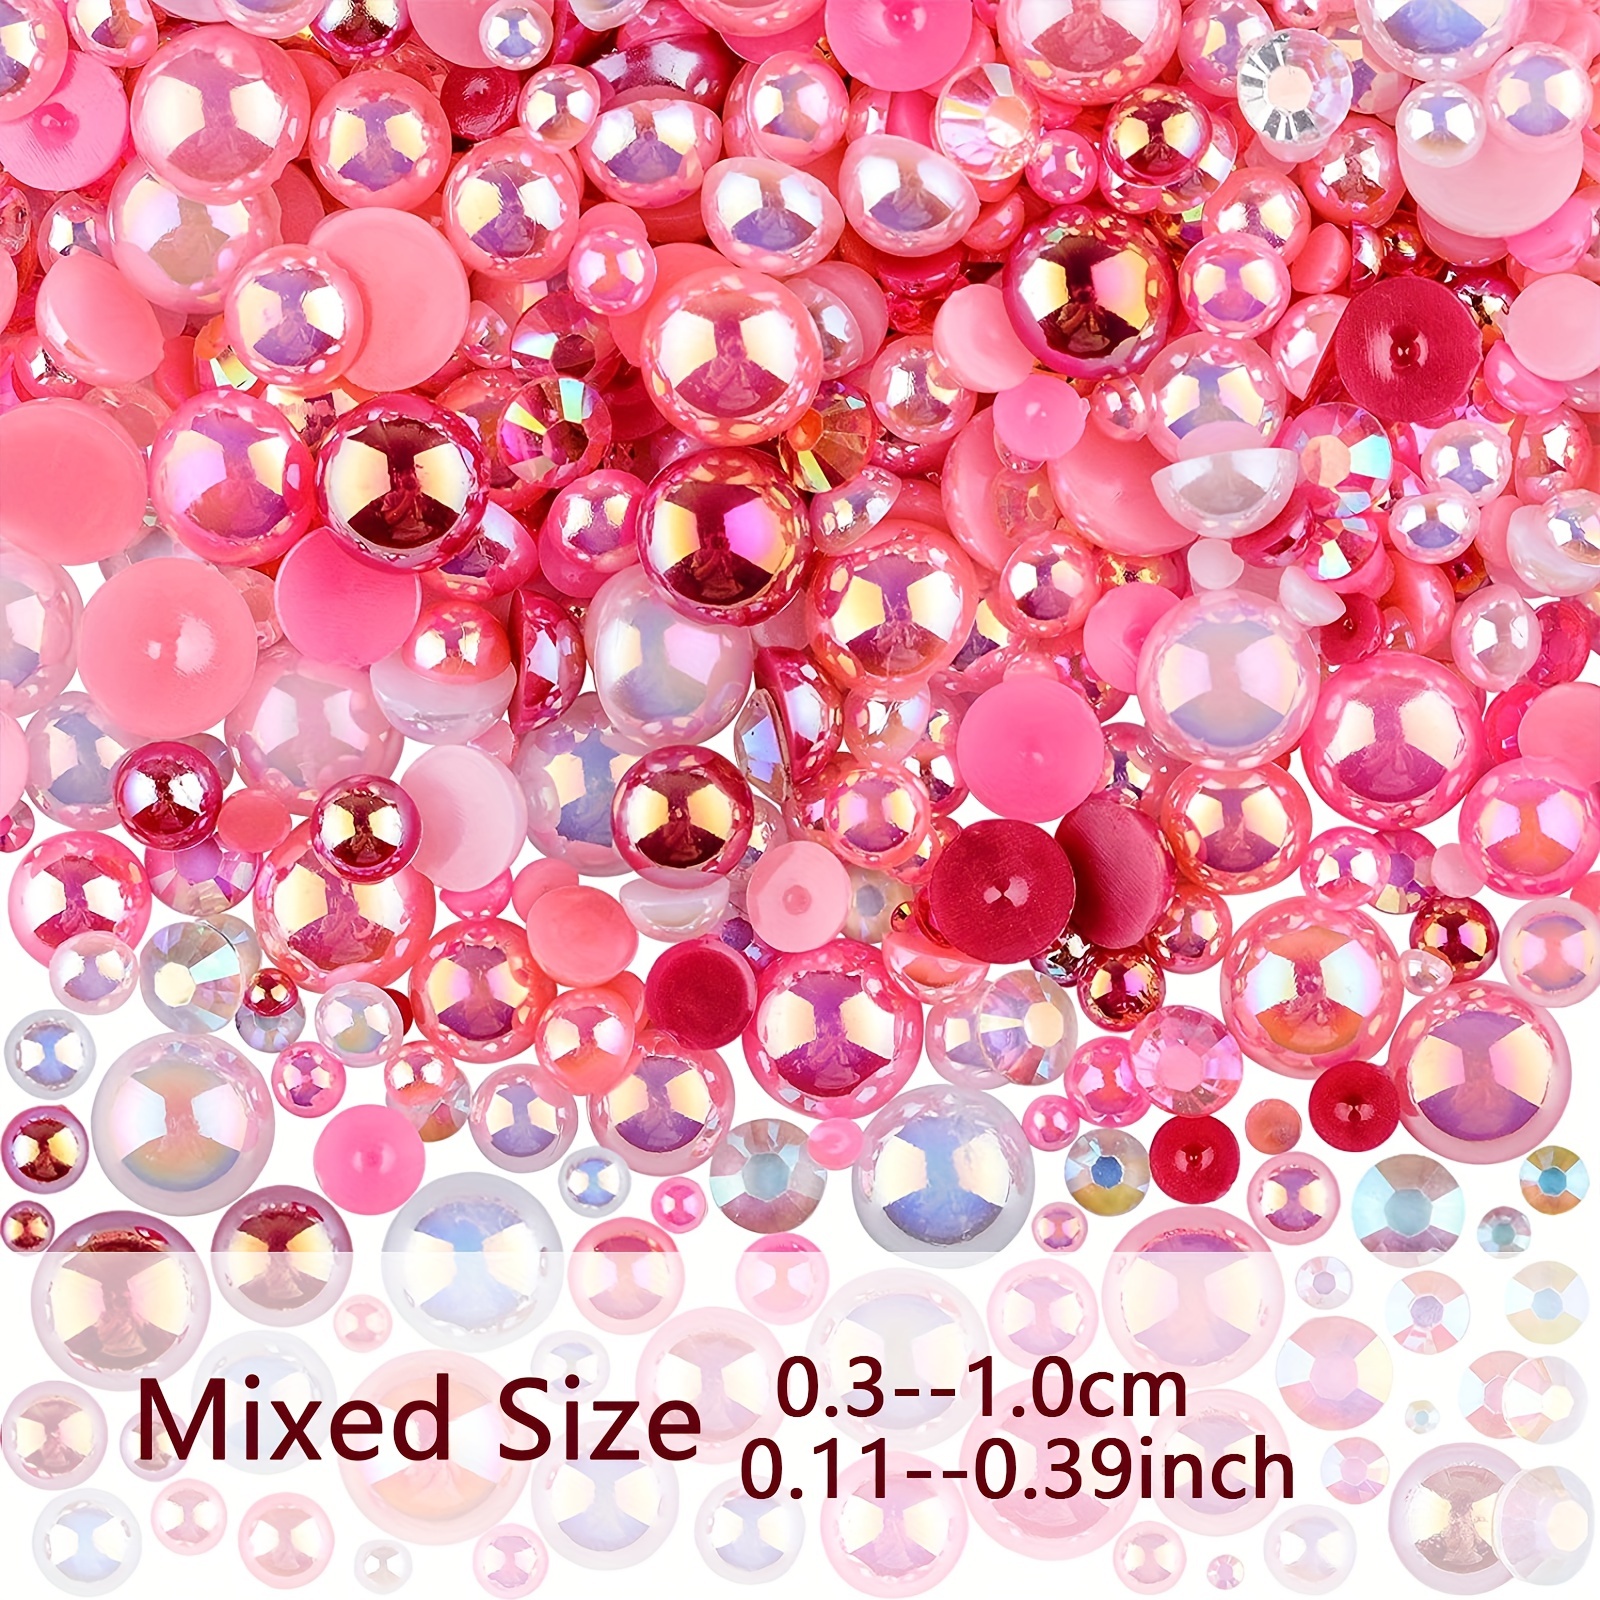 Towenm 60g Mix Pearls and Rhinestones, Flatback Rhinestones and Pearls for  Crafts Tumblers Shoes Nails Face Art, 2mm-10mm Mixed Sizes Half Pearls and